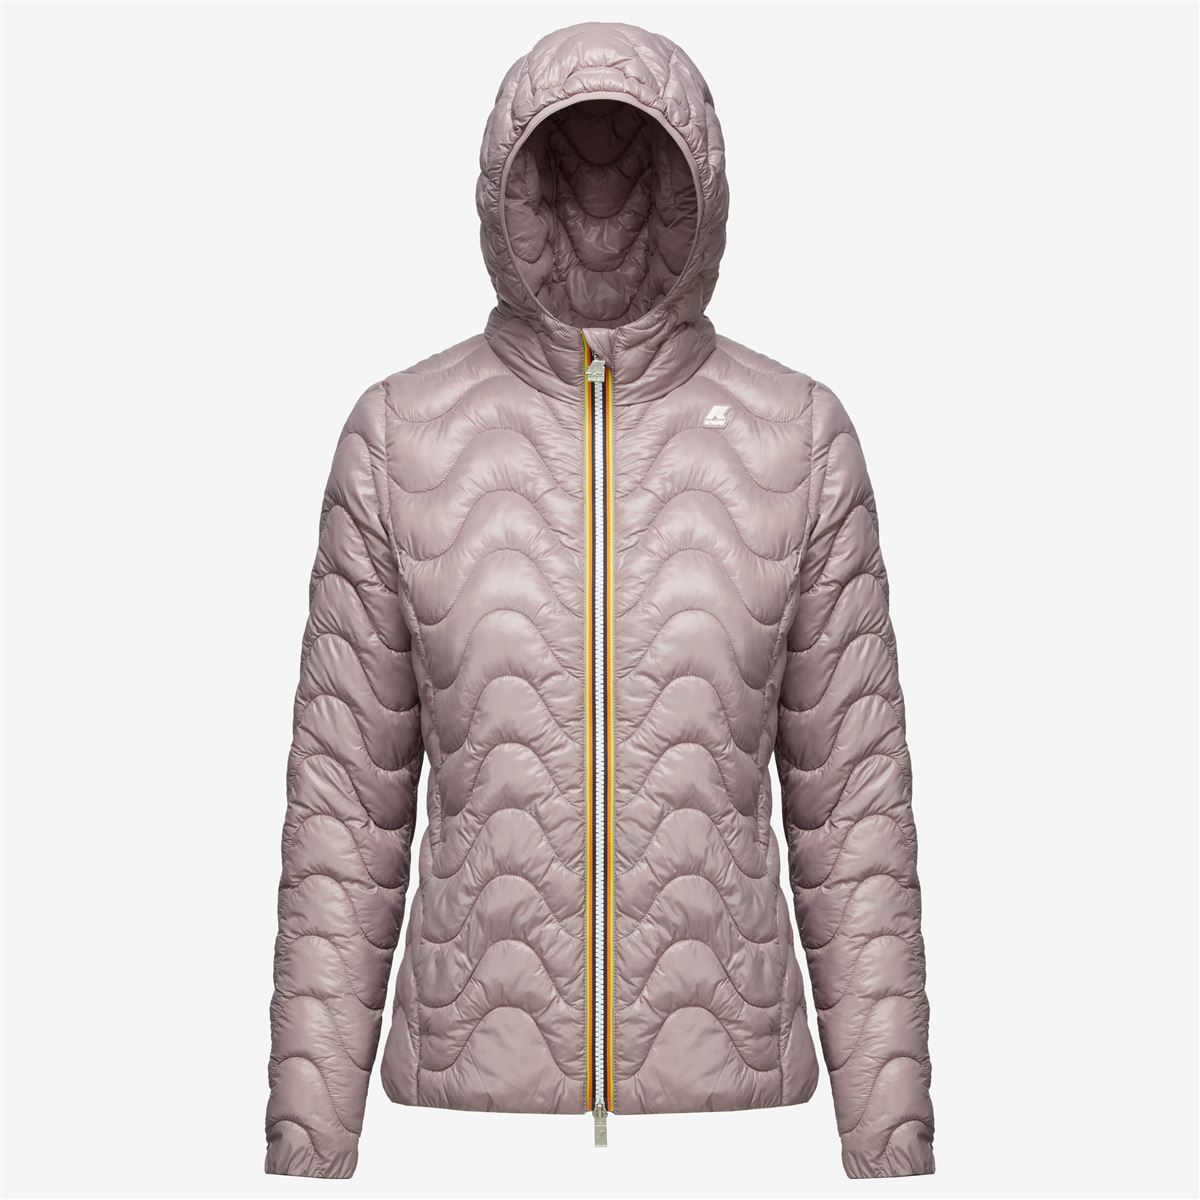 LILY ECO WARM - JACKET - WOMAN - VIOLET DUSTY